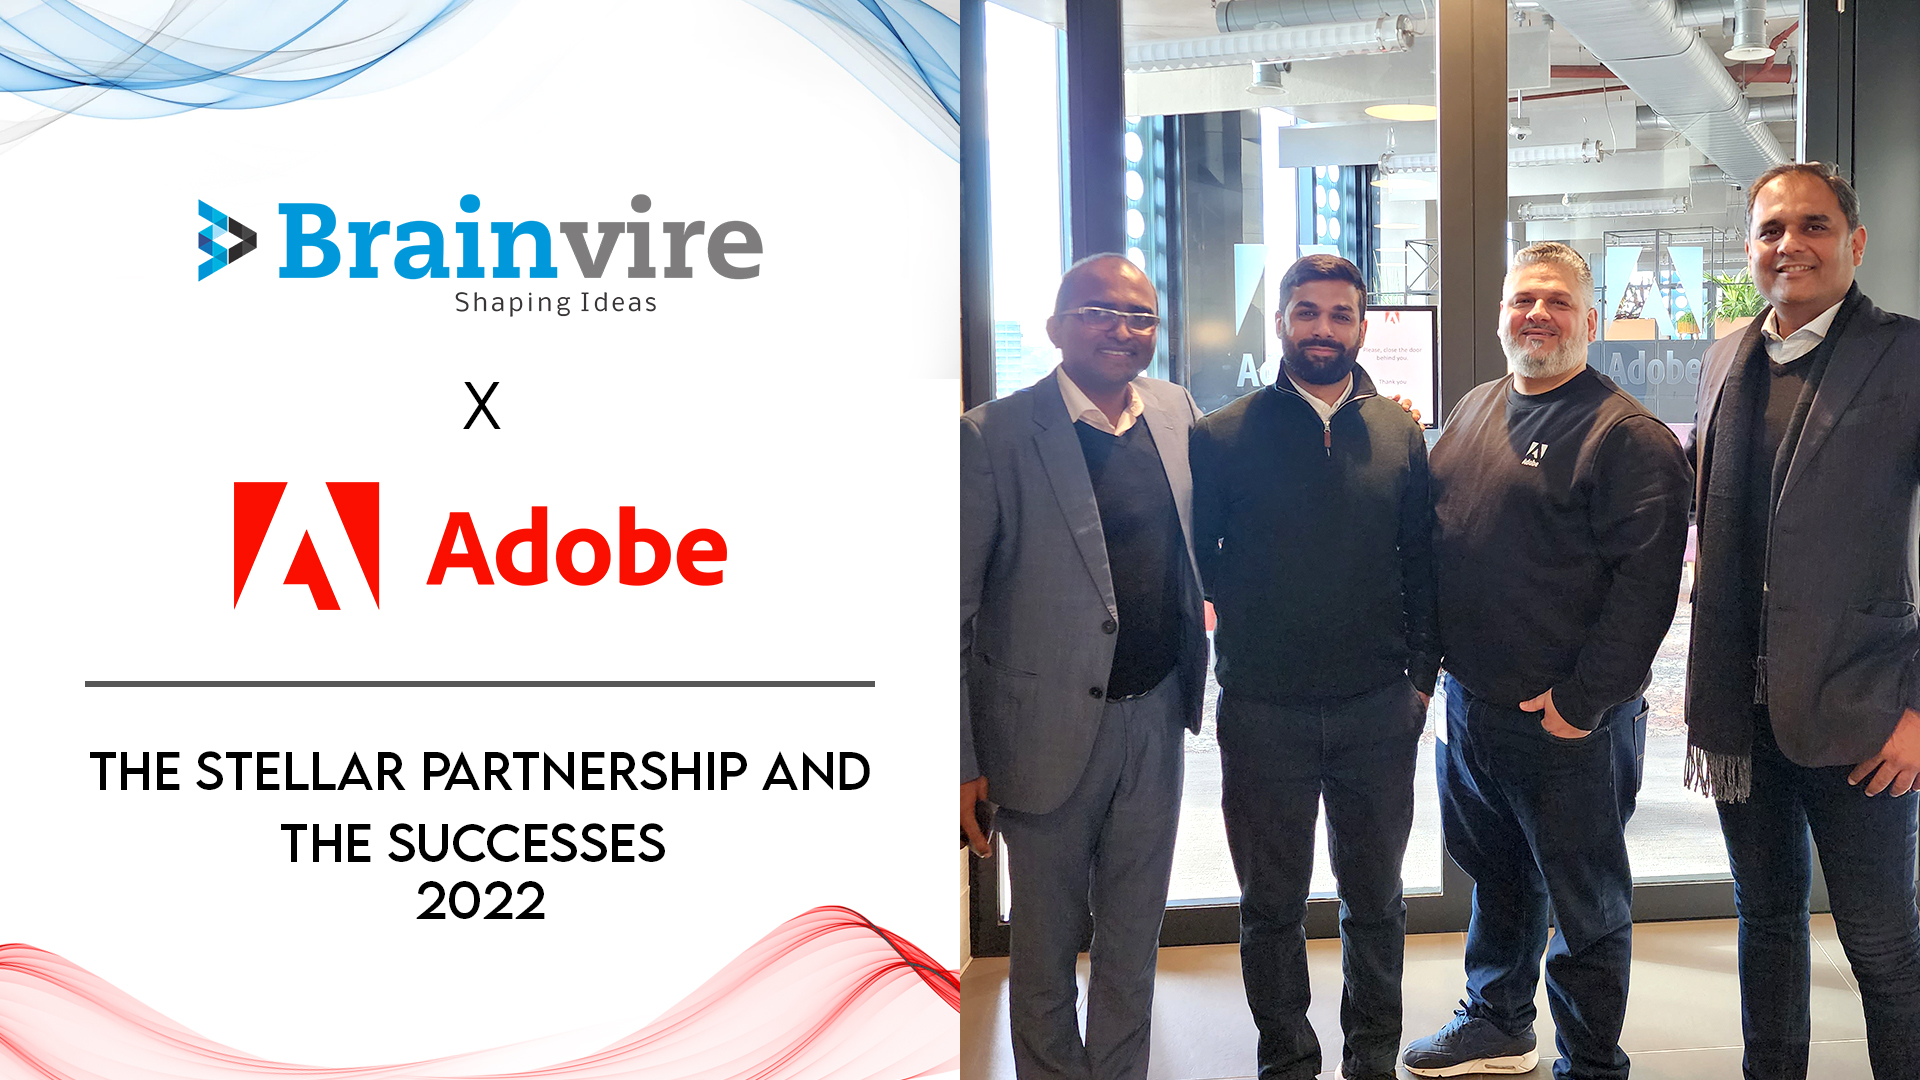 Brainvire x Adobe: Your Ideal Partner